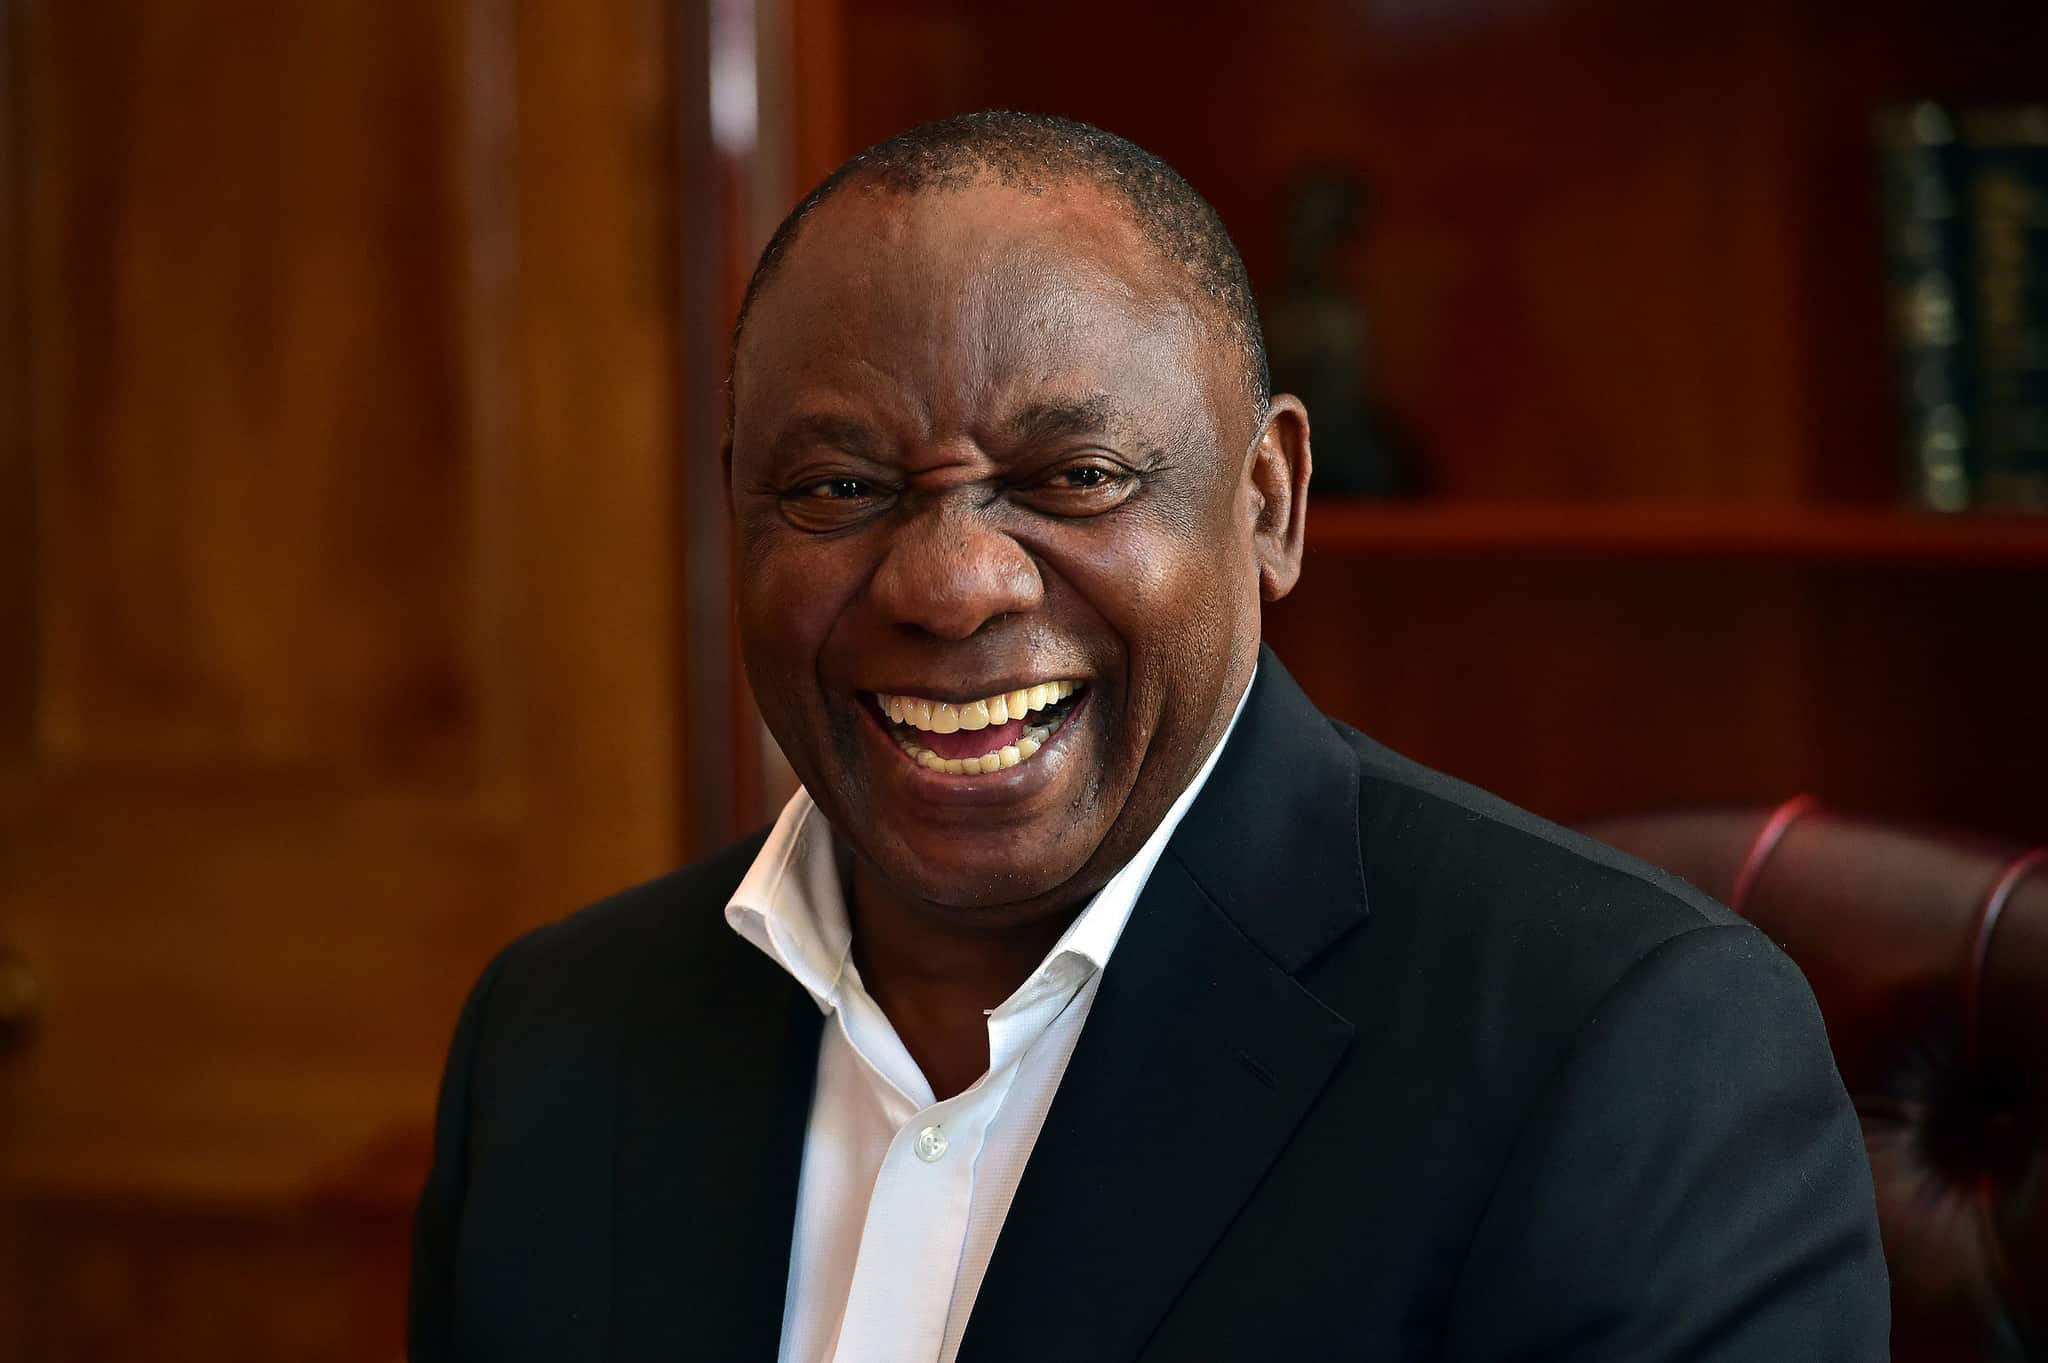 Top 15 richest presidents in Africa in 2021 Who are the wealthiest?